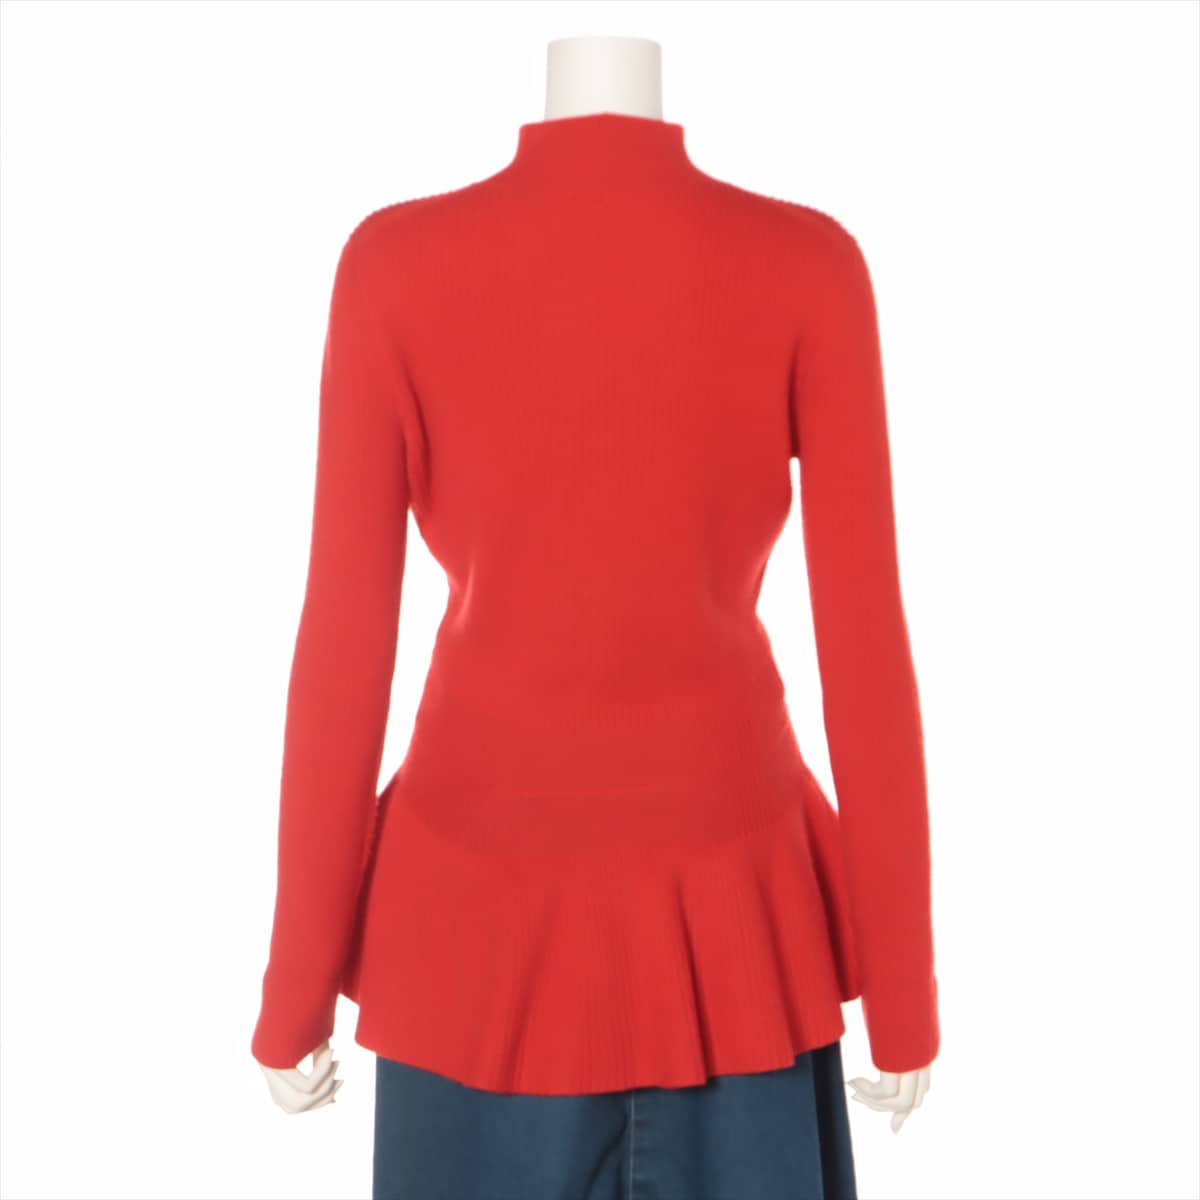 Christian Dior Wool Knit 38 Ladies' Red